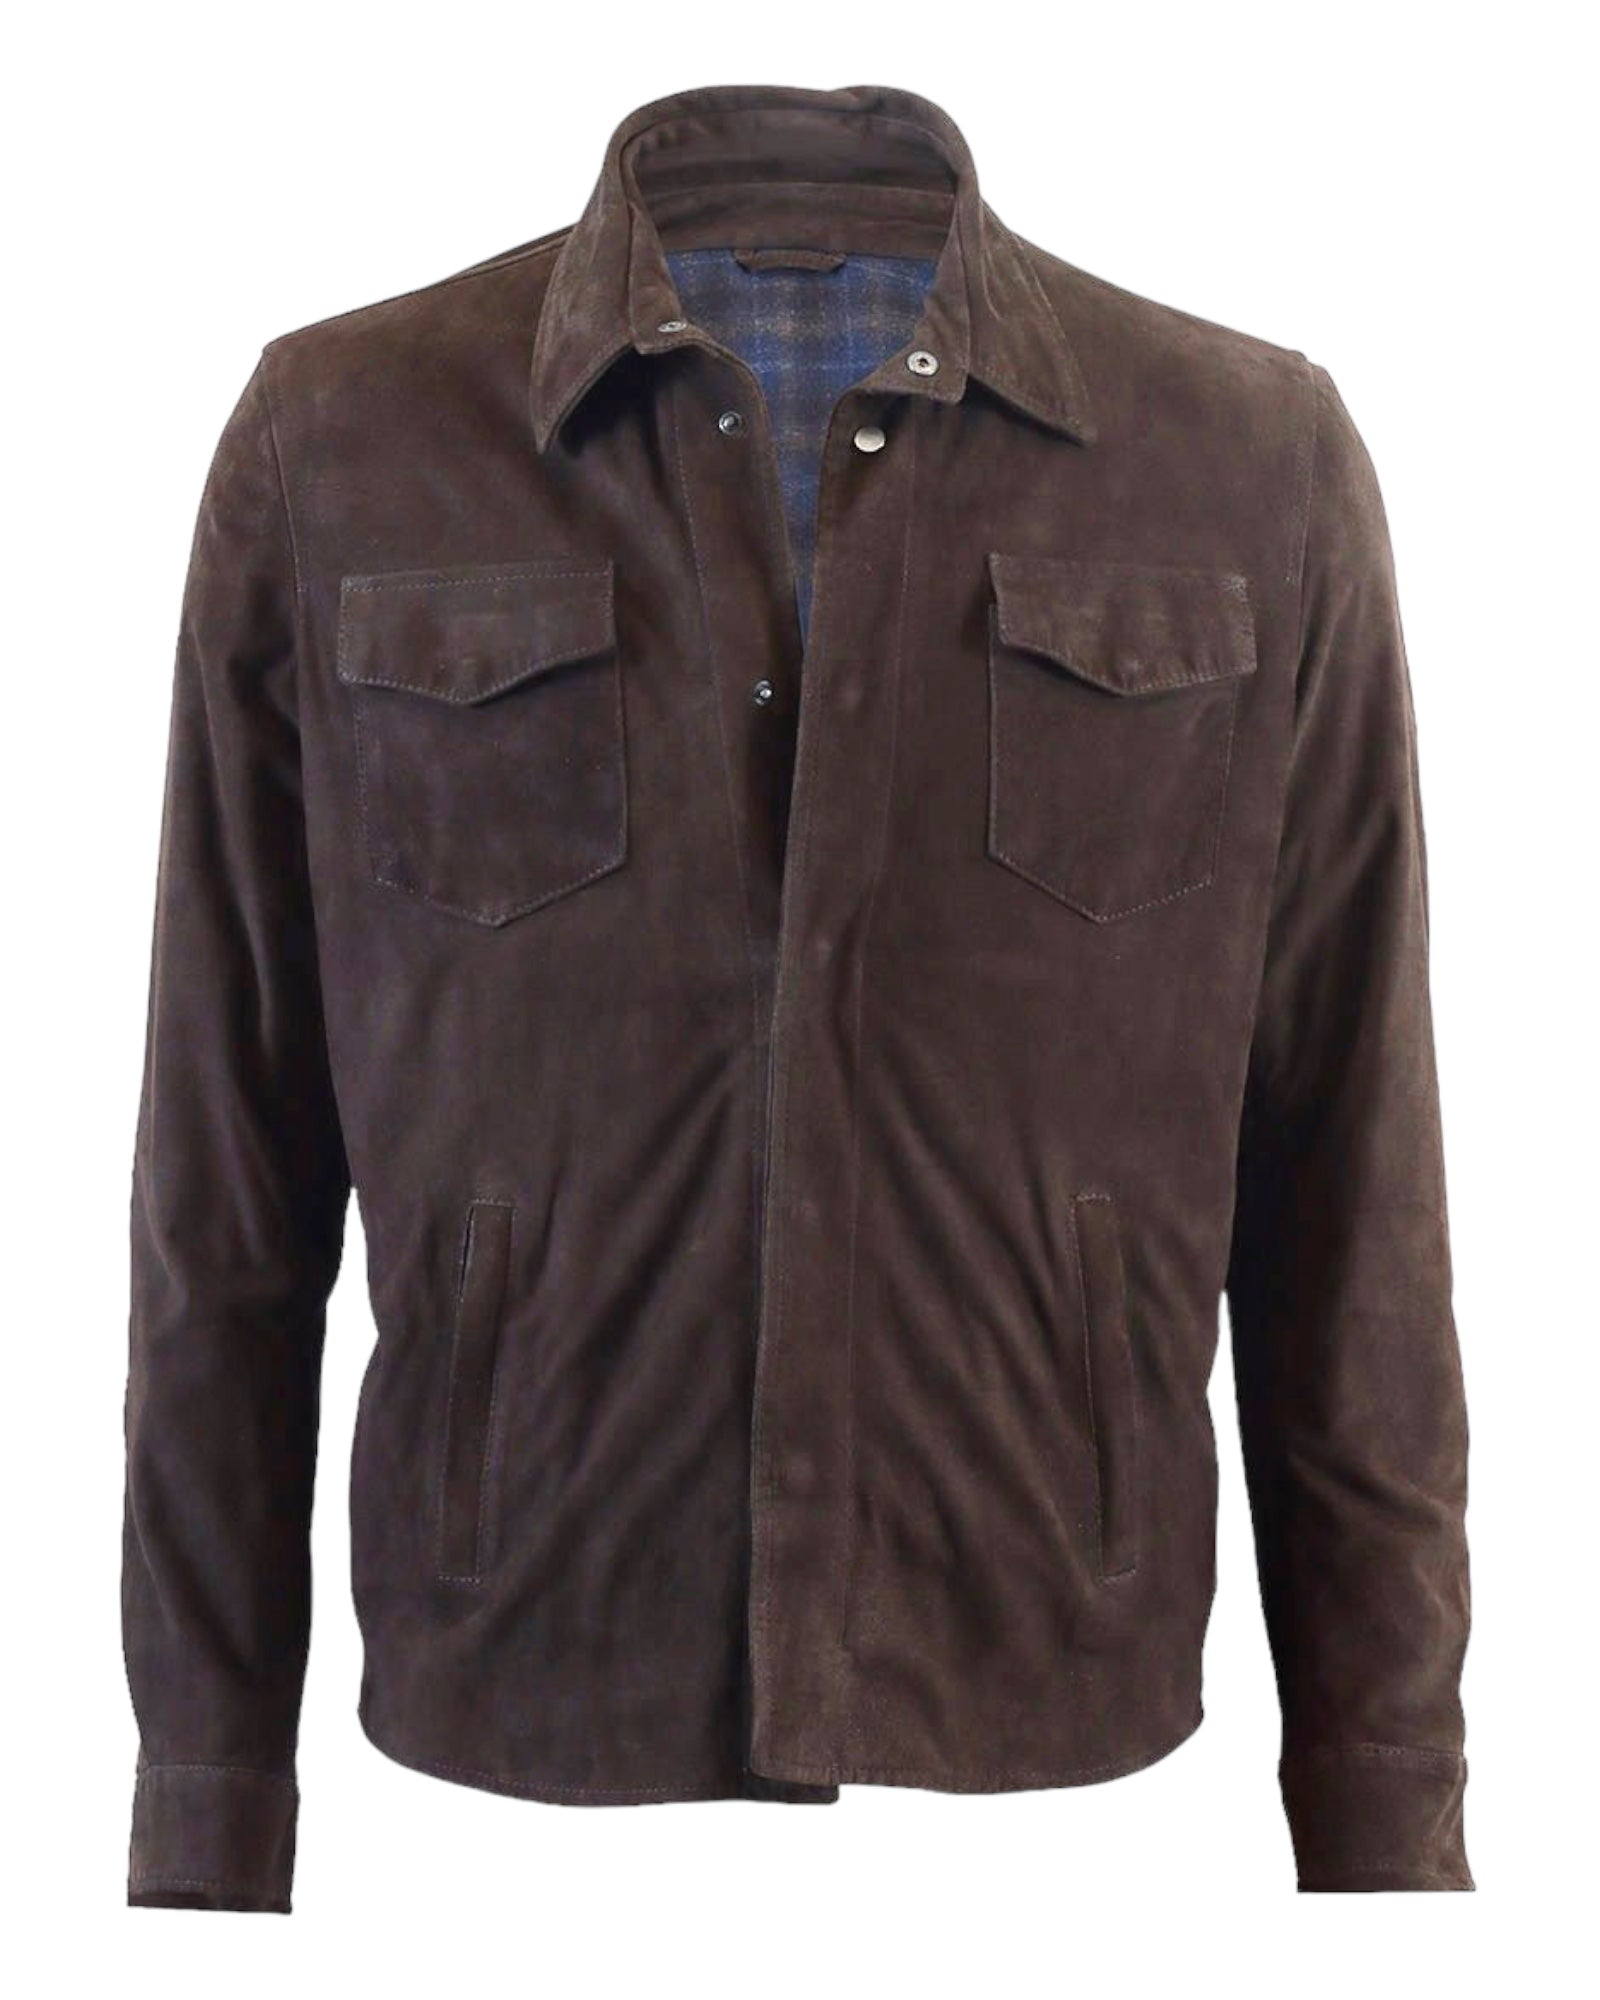 Insulated Leather Shirt Jacket - Brown OUTERWEAR48Member Price $1199